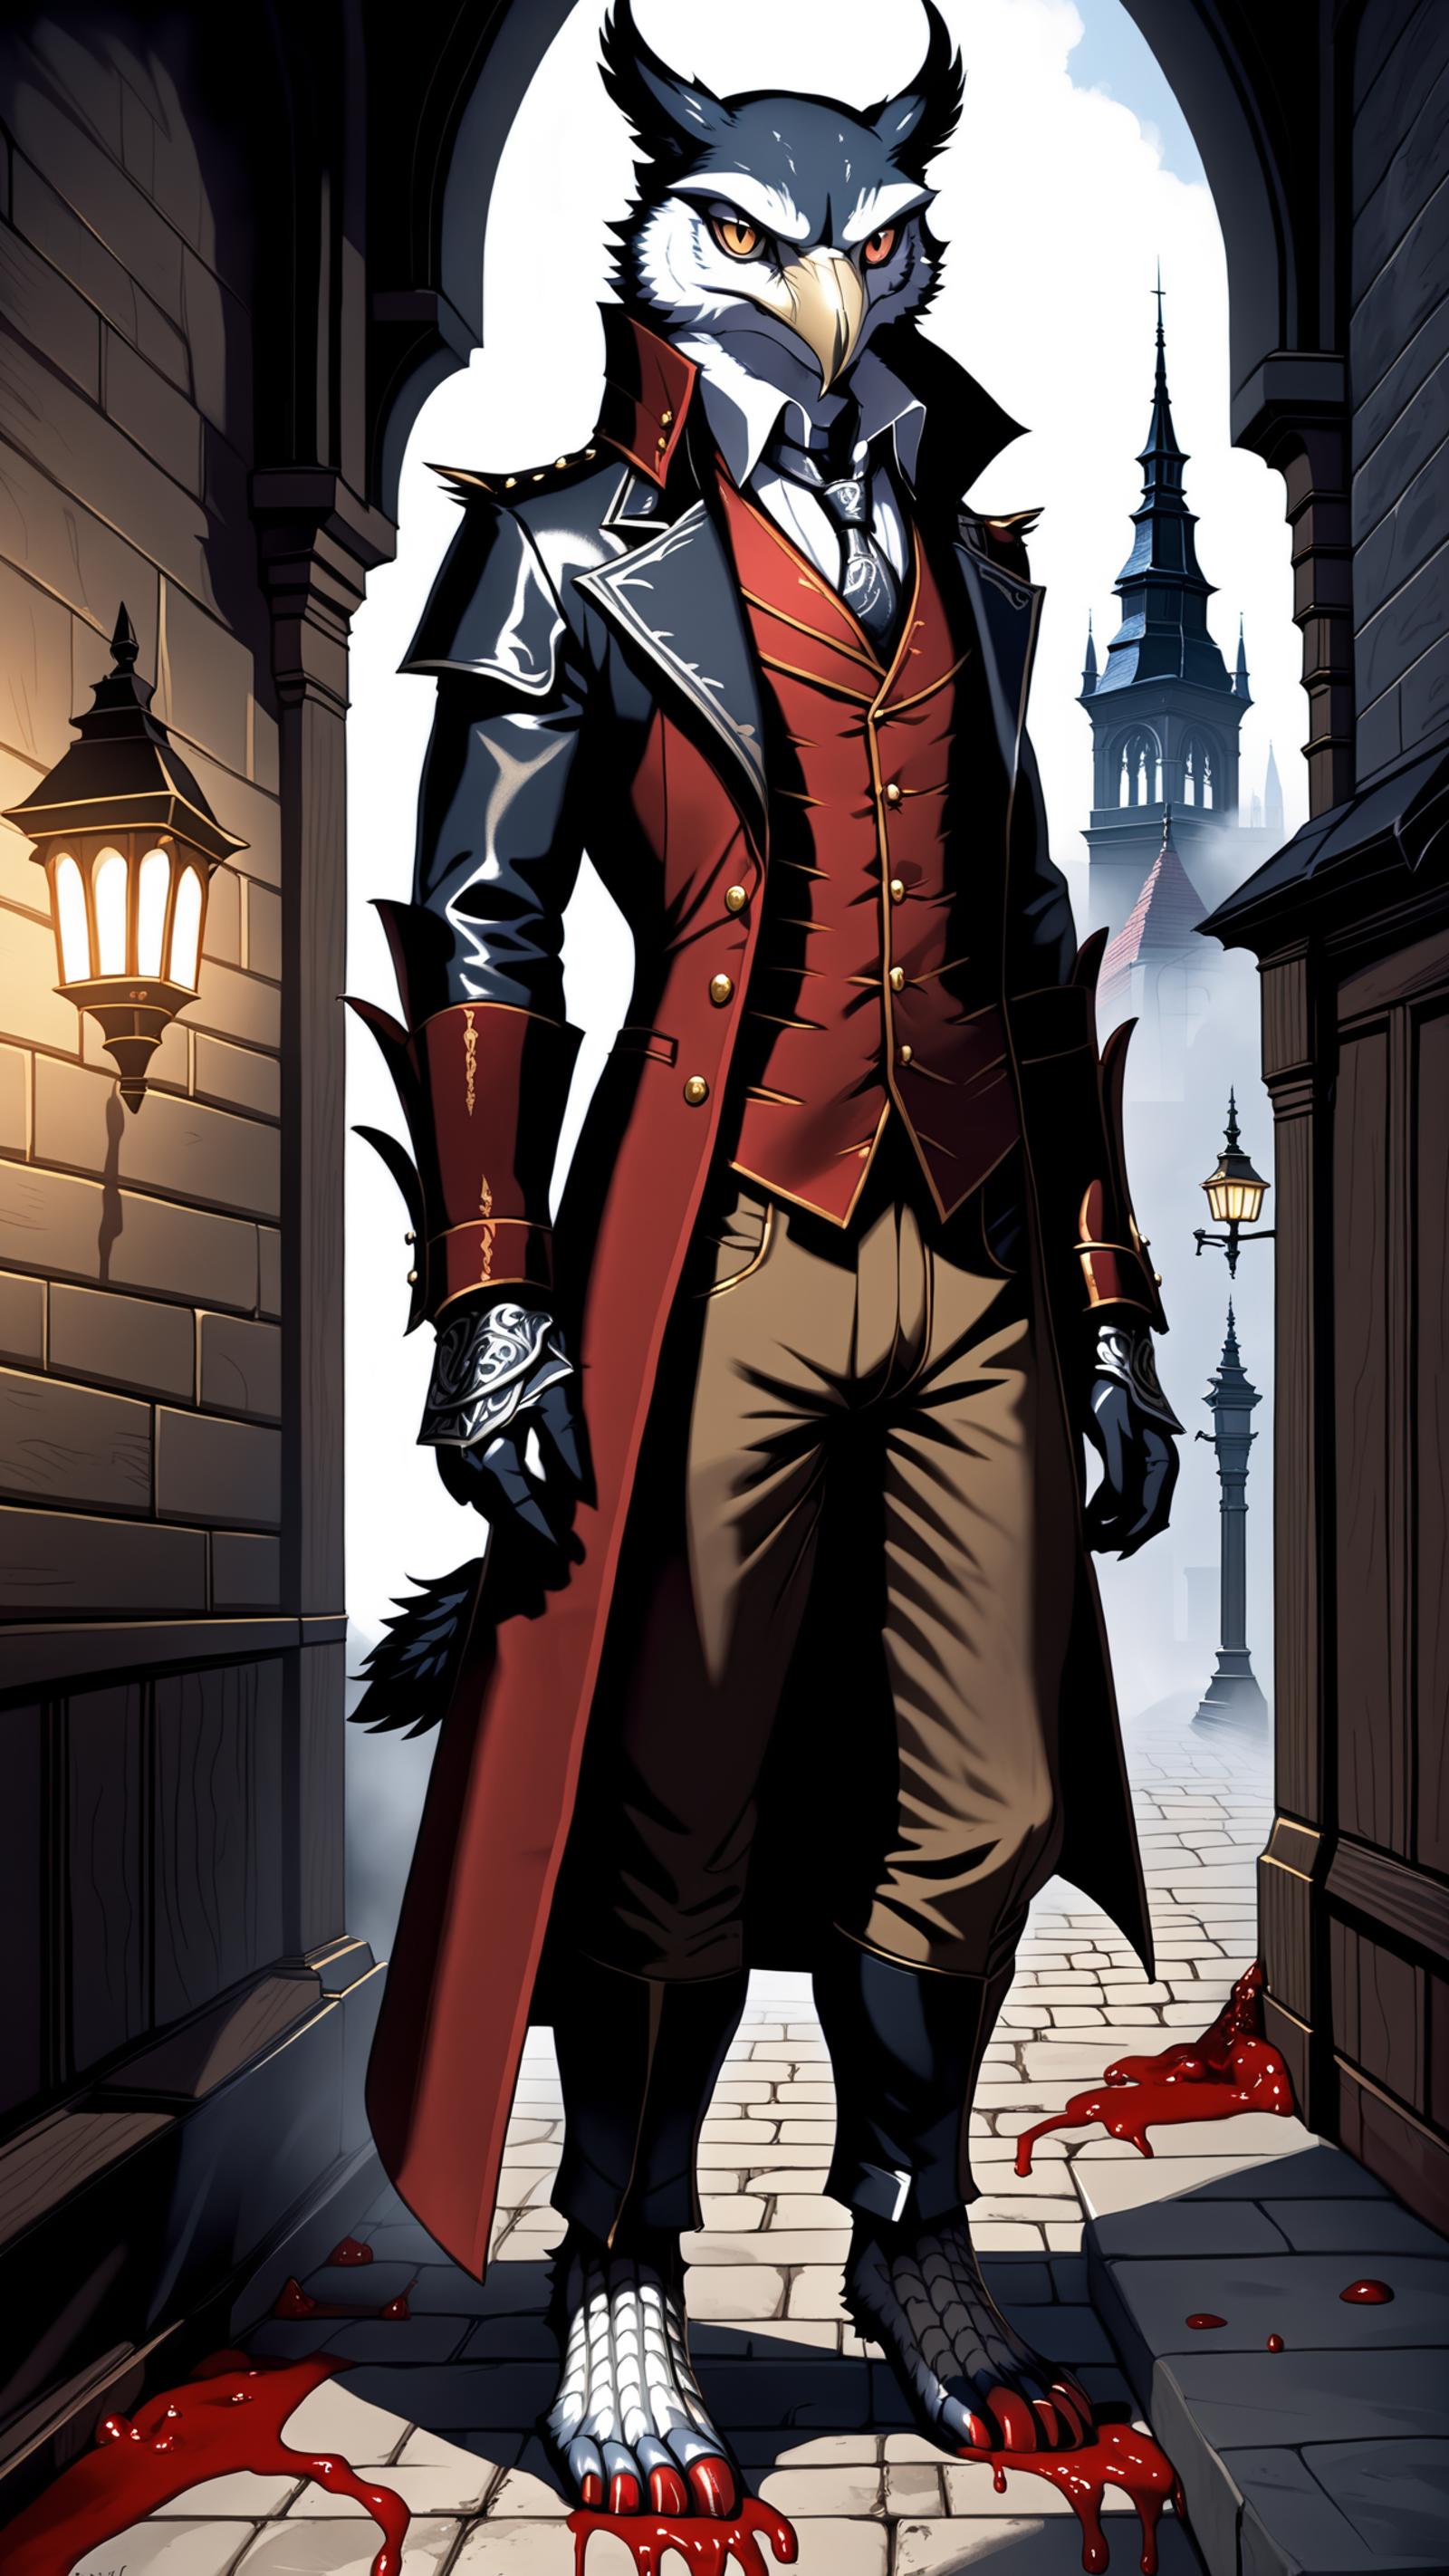 A man in a red and black frock coat, standing on a stone street.